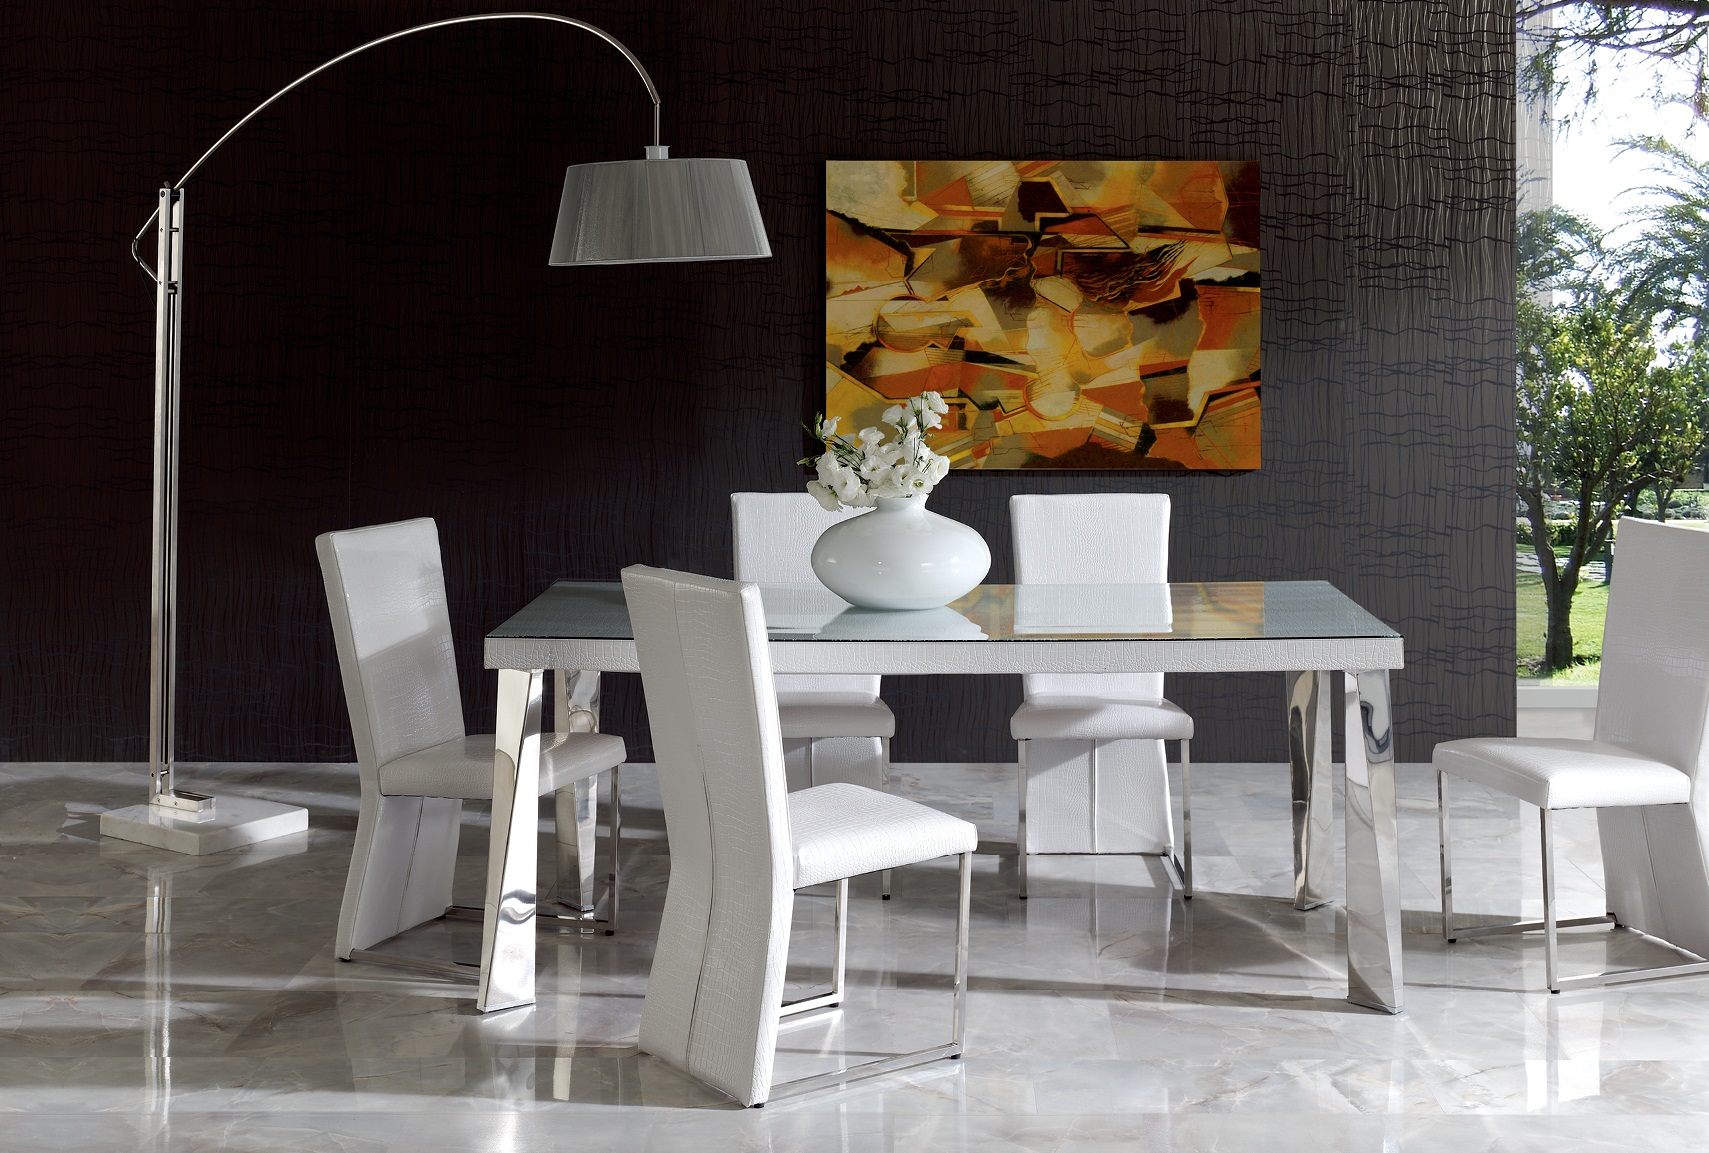 How to Use Modern Floor Lamps in Your Dining Room Lighting Design (6)